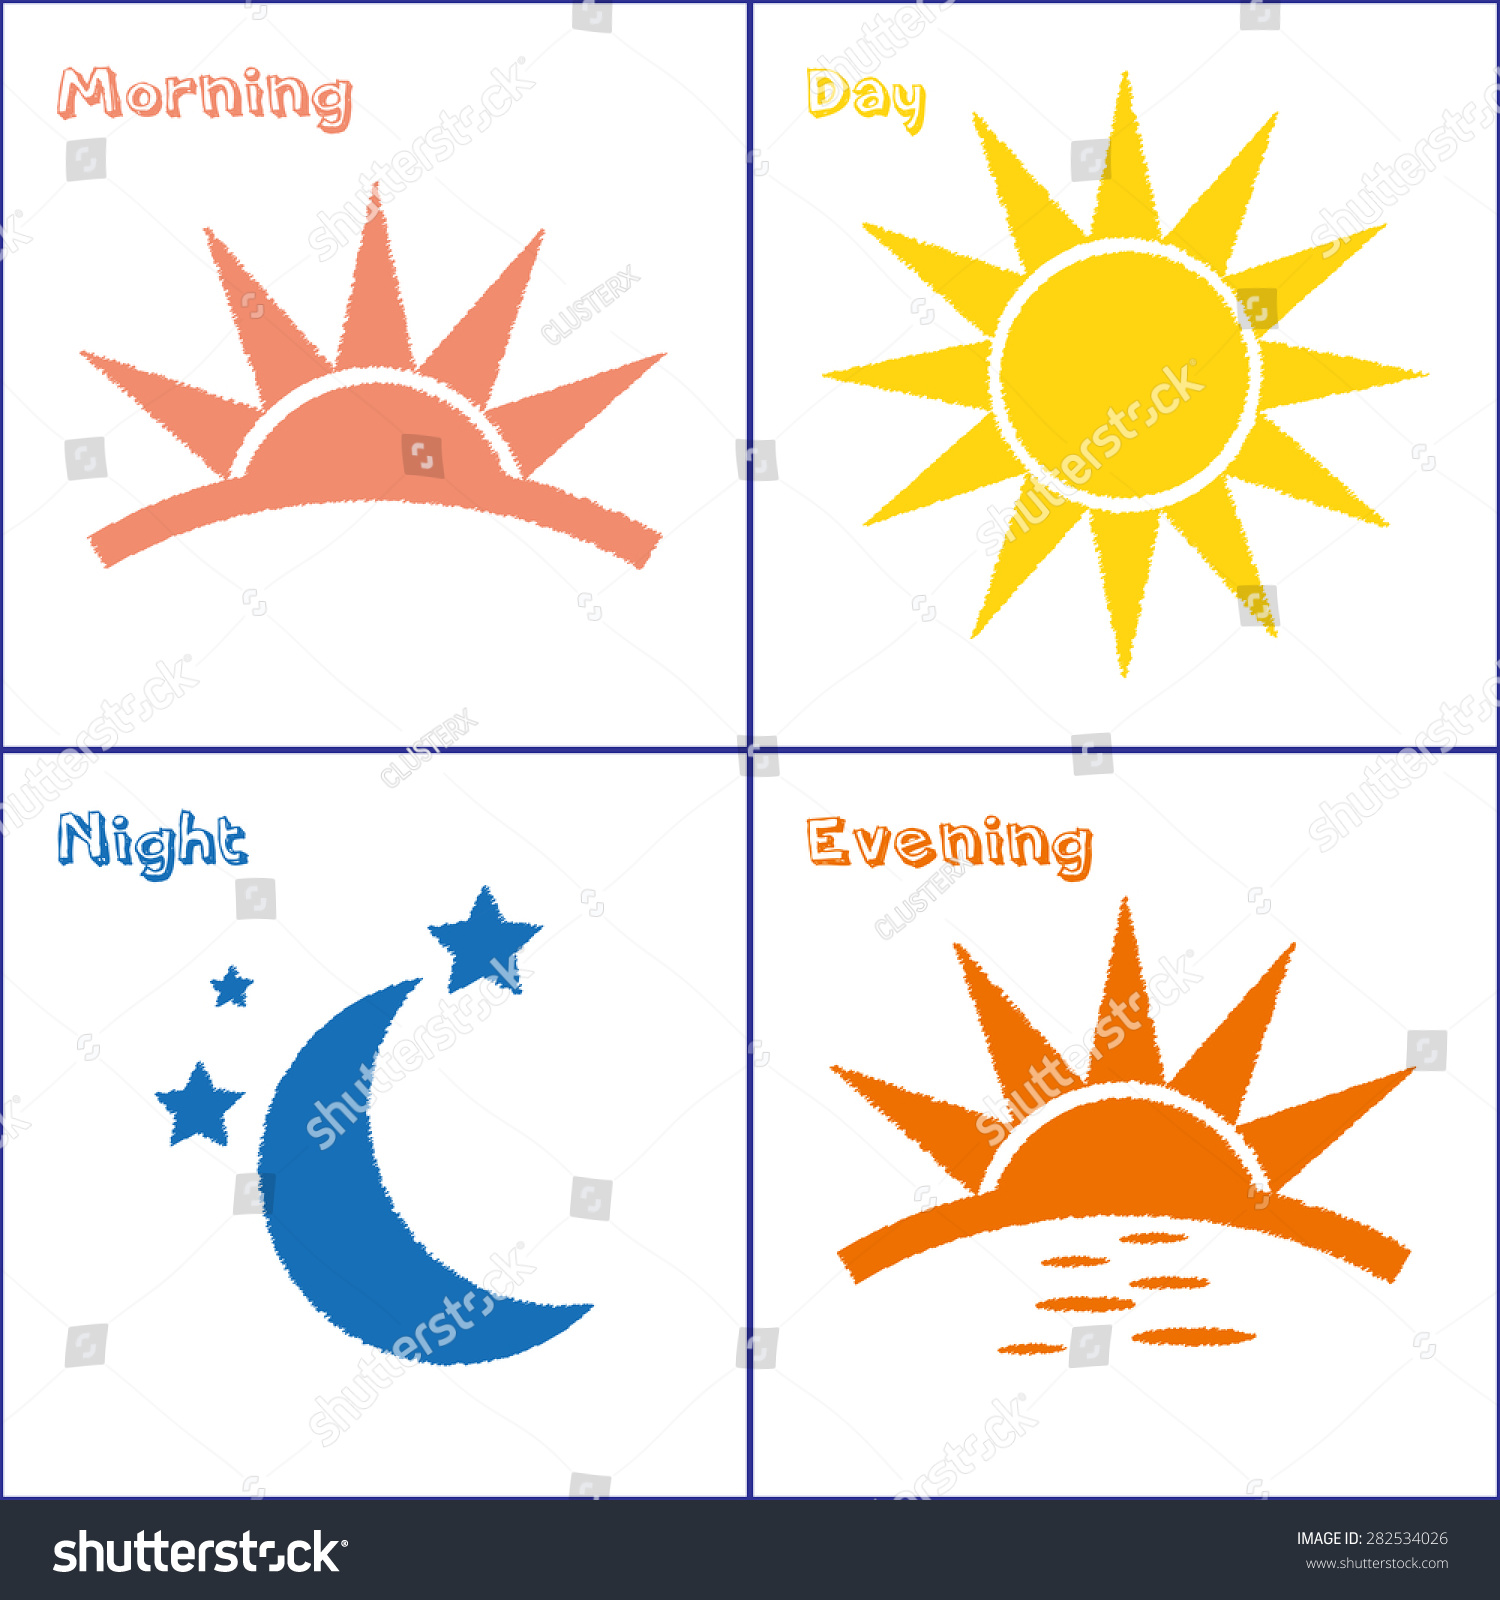 Sun And Moon Morning Day Evening Night Handdrawn Vector Icon Set ...